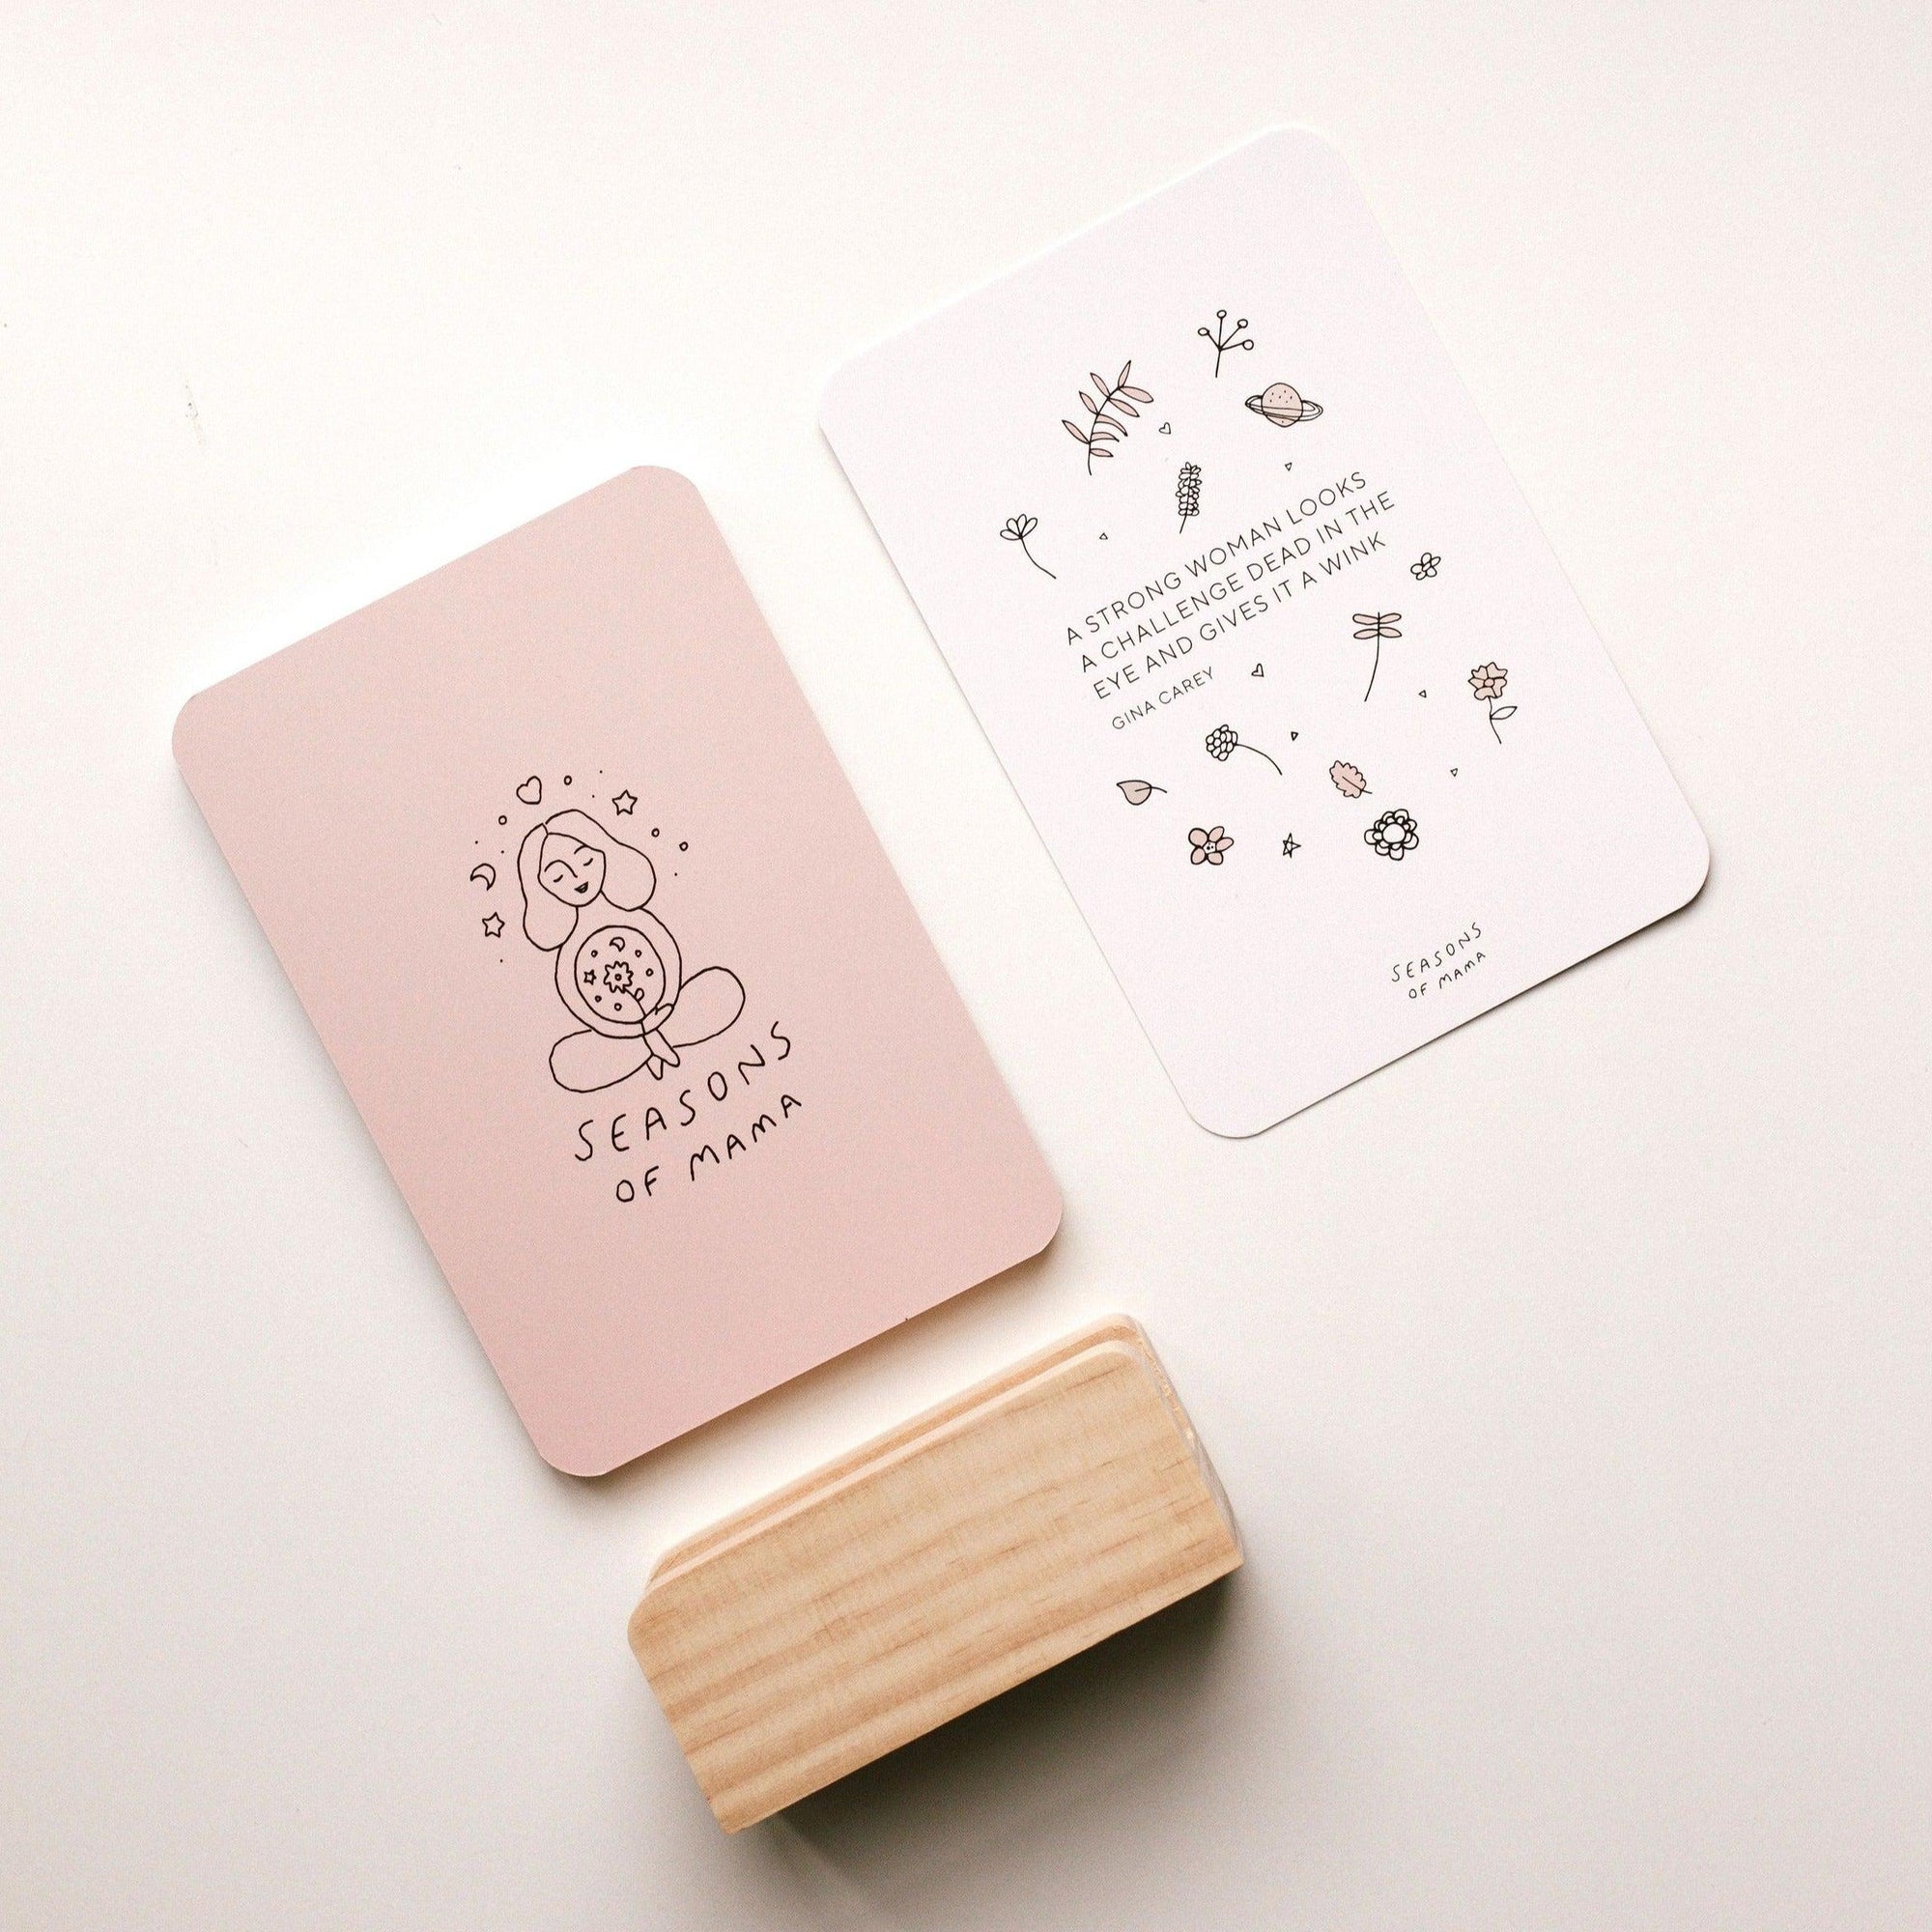 A Birth Affirmation Card featuring a wooden stamp from Seasons of Mama.